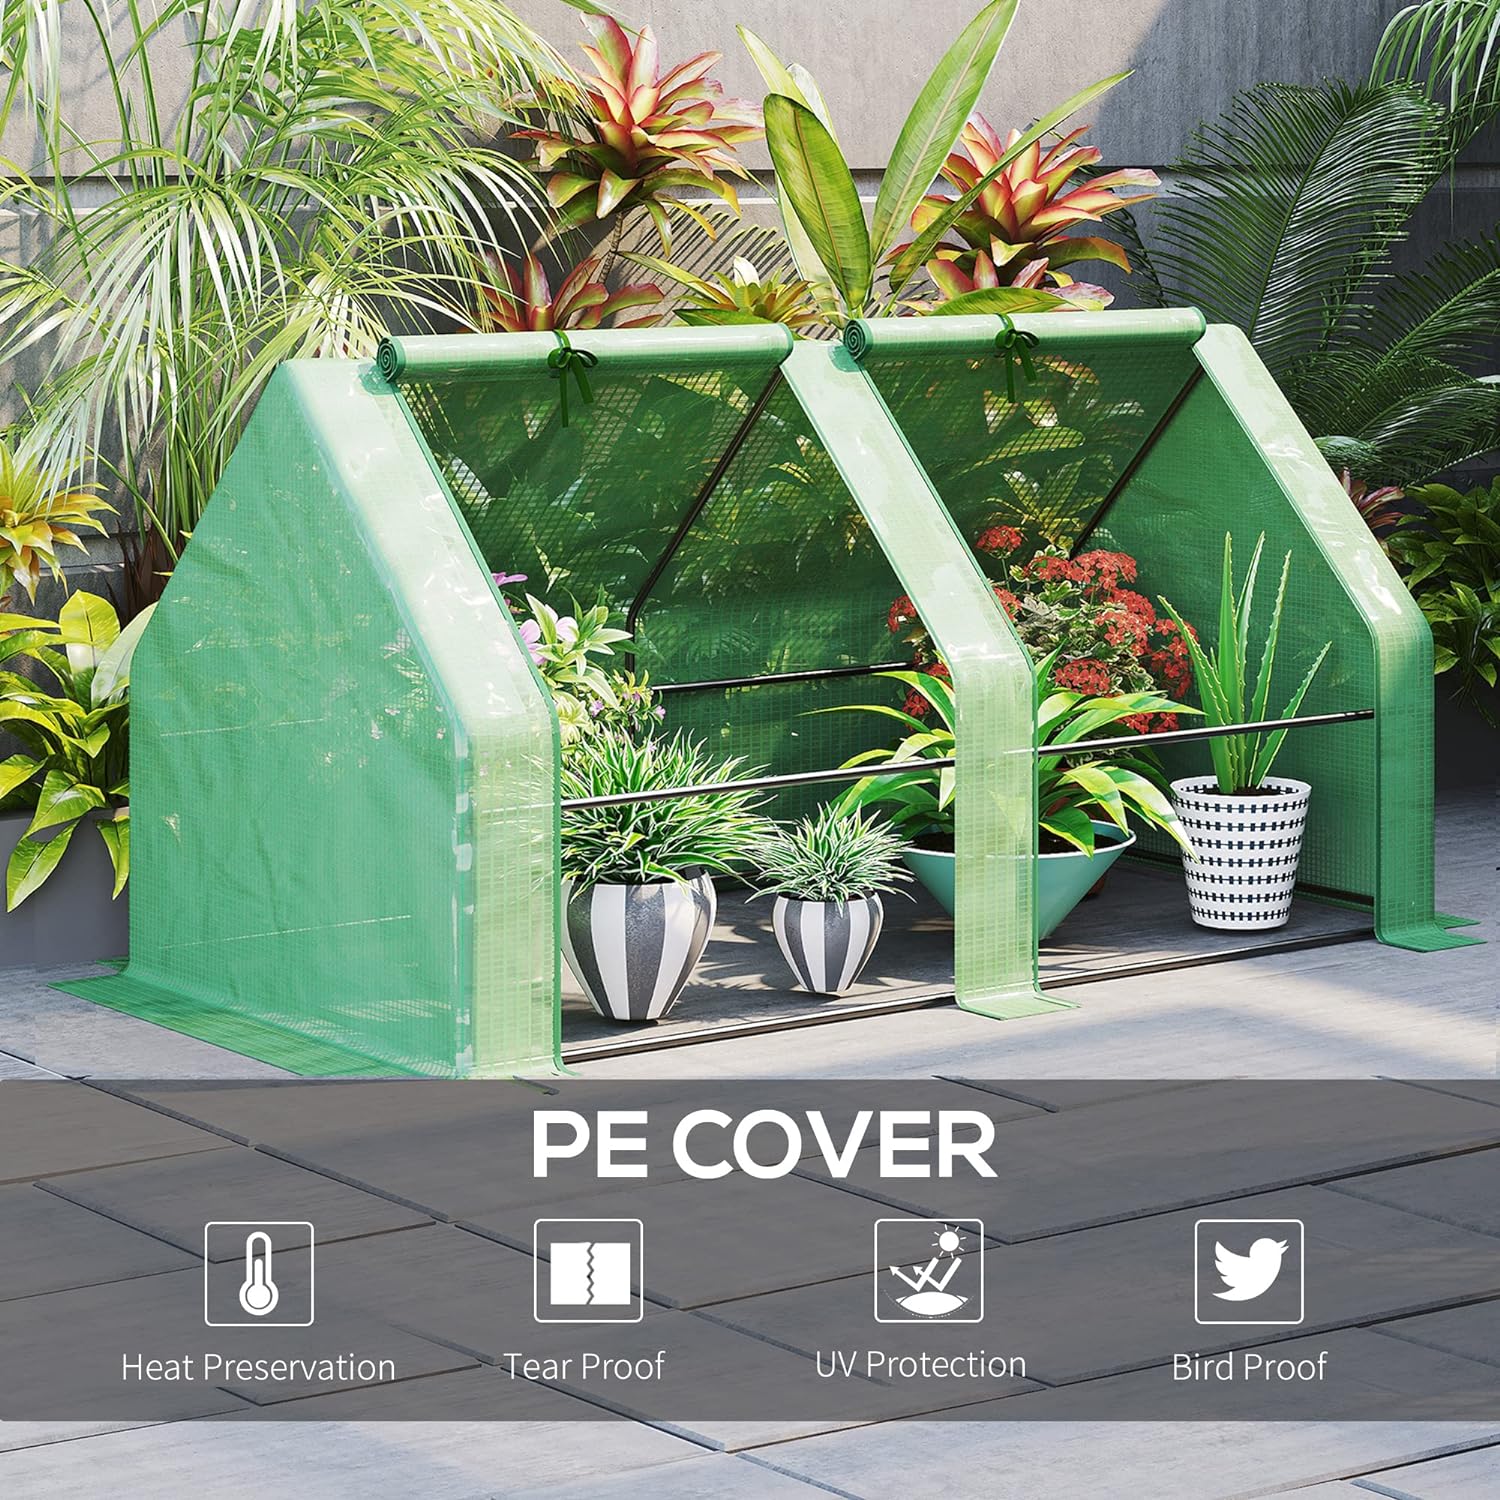 Outsunny 6 x 3 x 3 Portable Tunnel Greenhouse Outdoor Garden Mini with Large Zipper Doors  Water/UV PE Cover Green